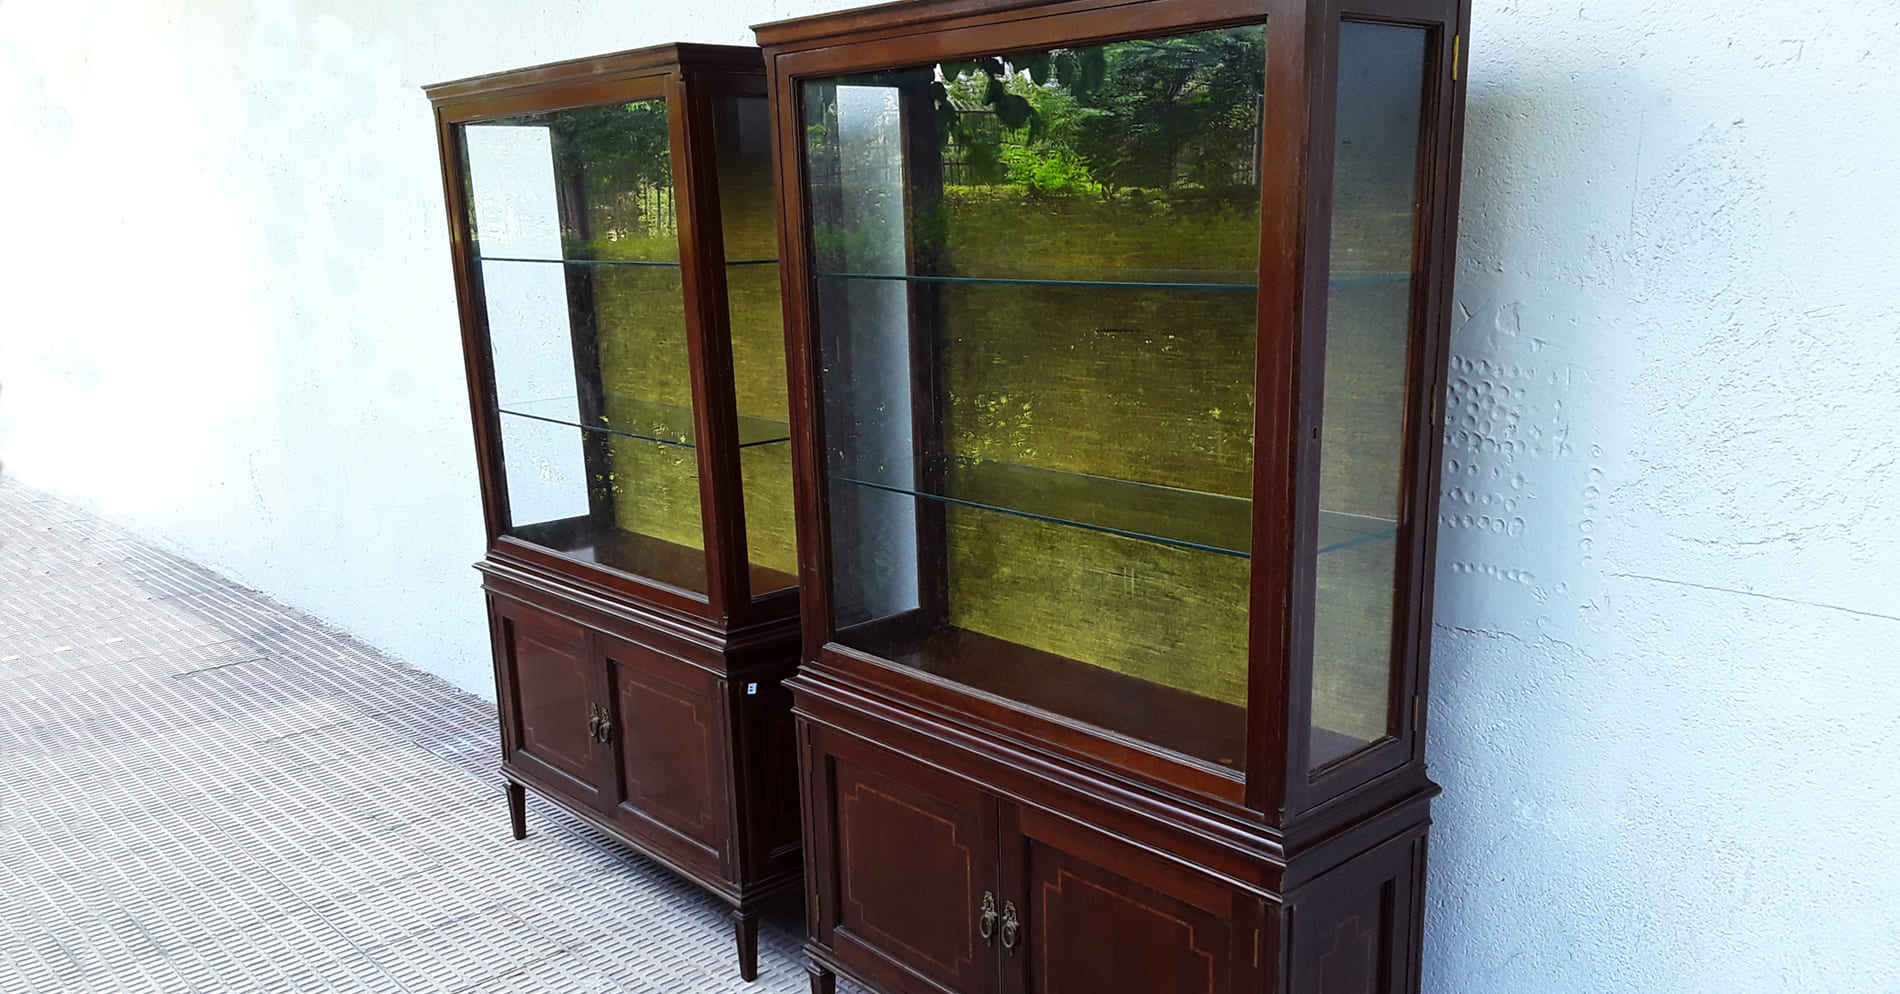 2 Louis XVI style display cabinets with inlaid woodwork